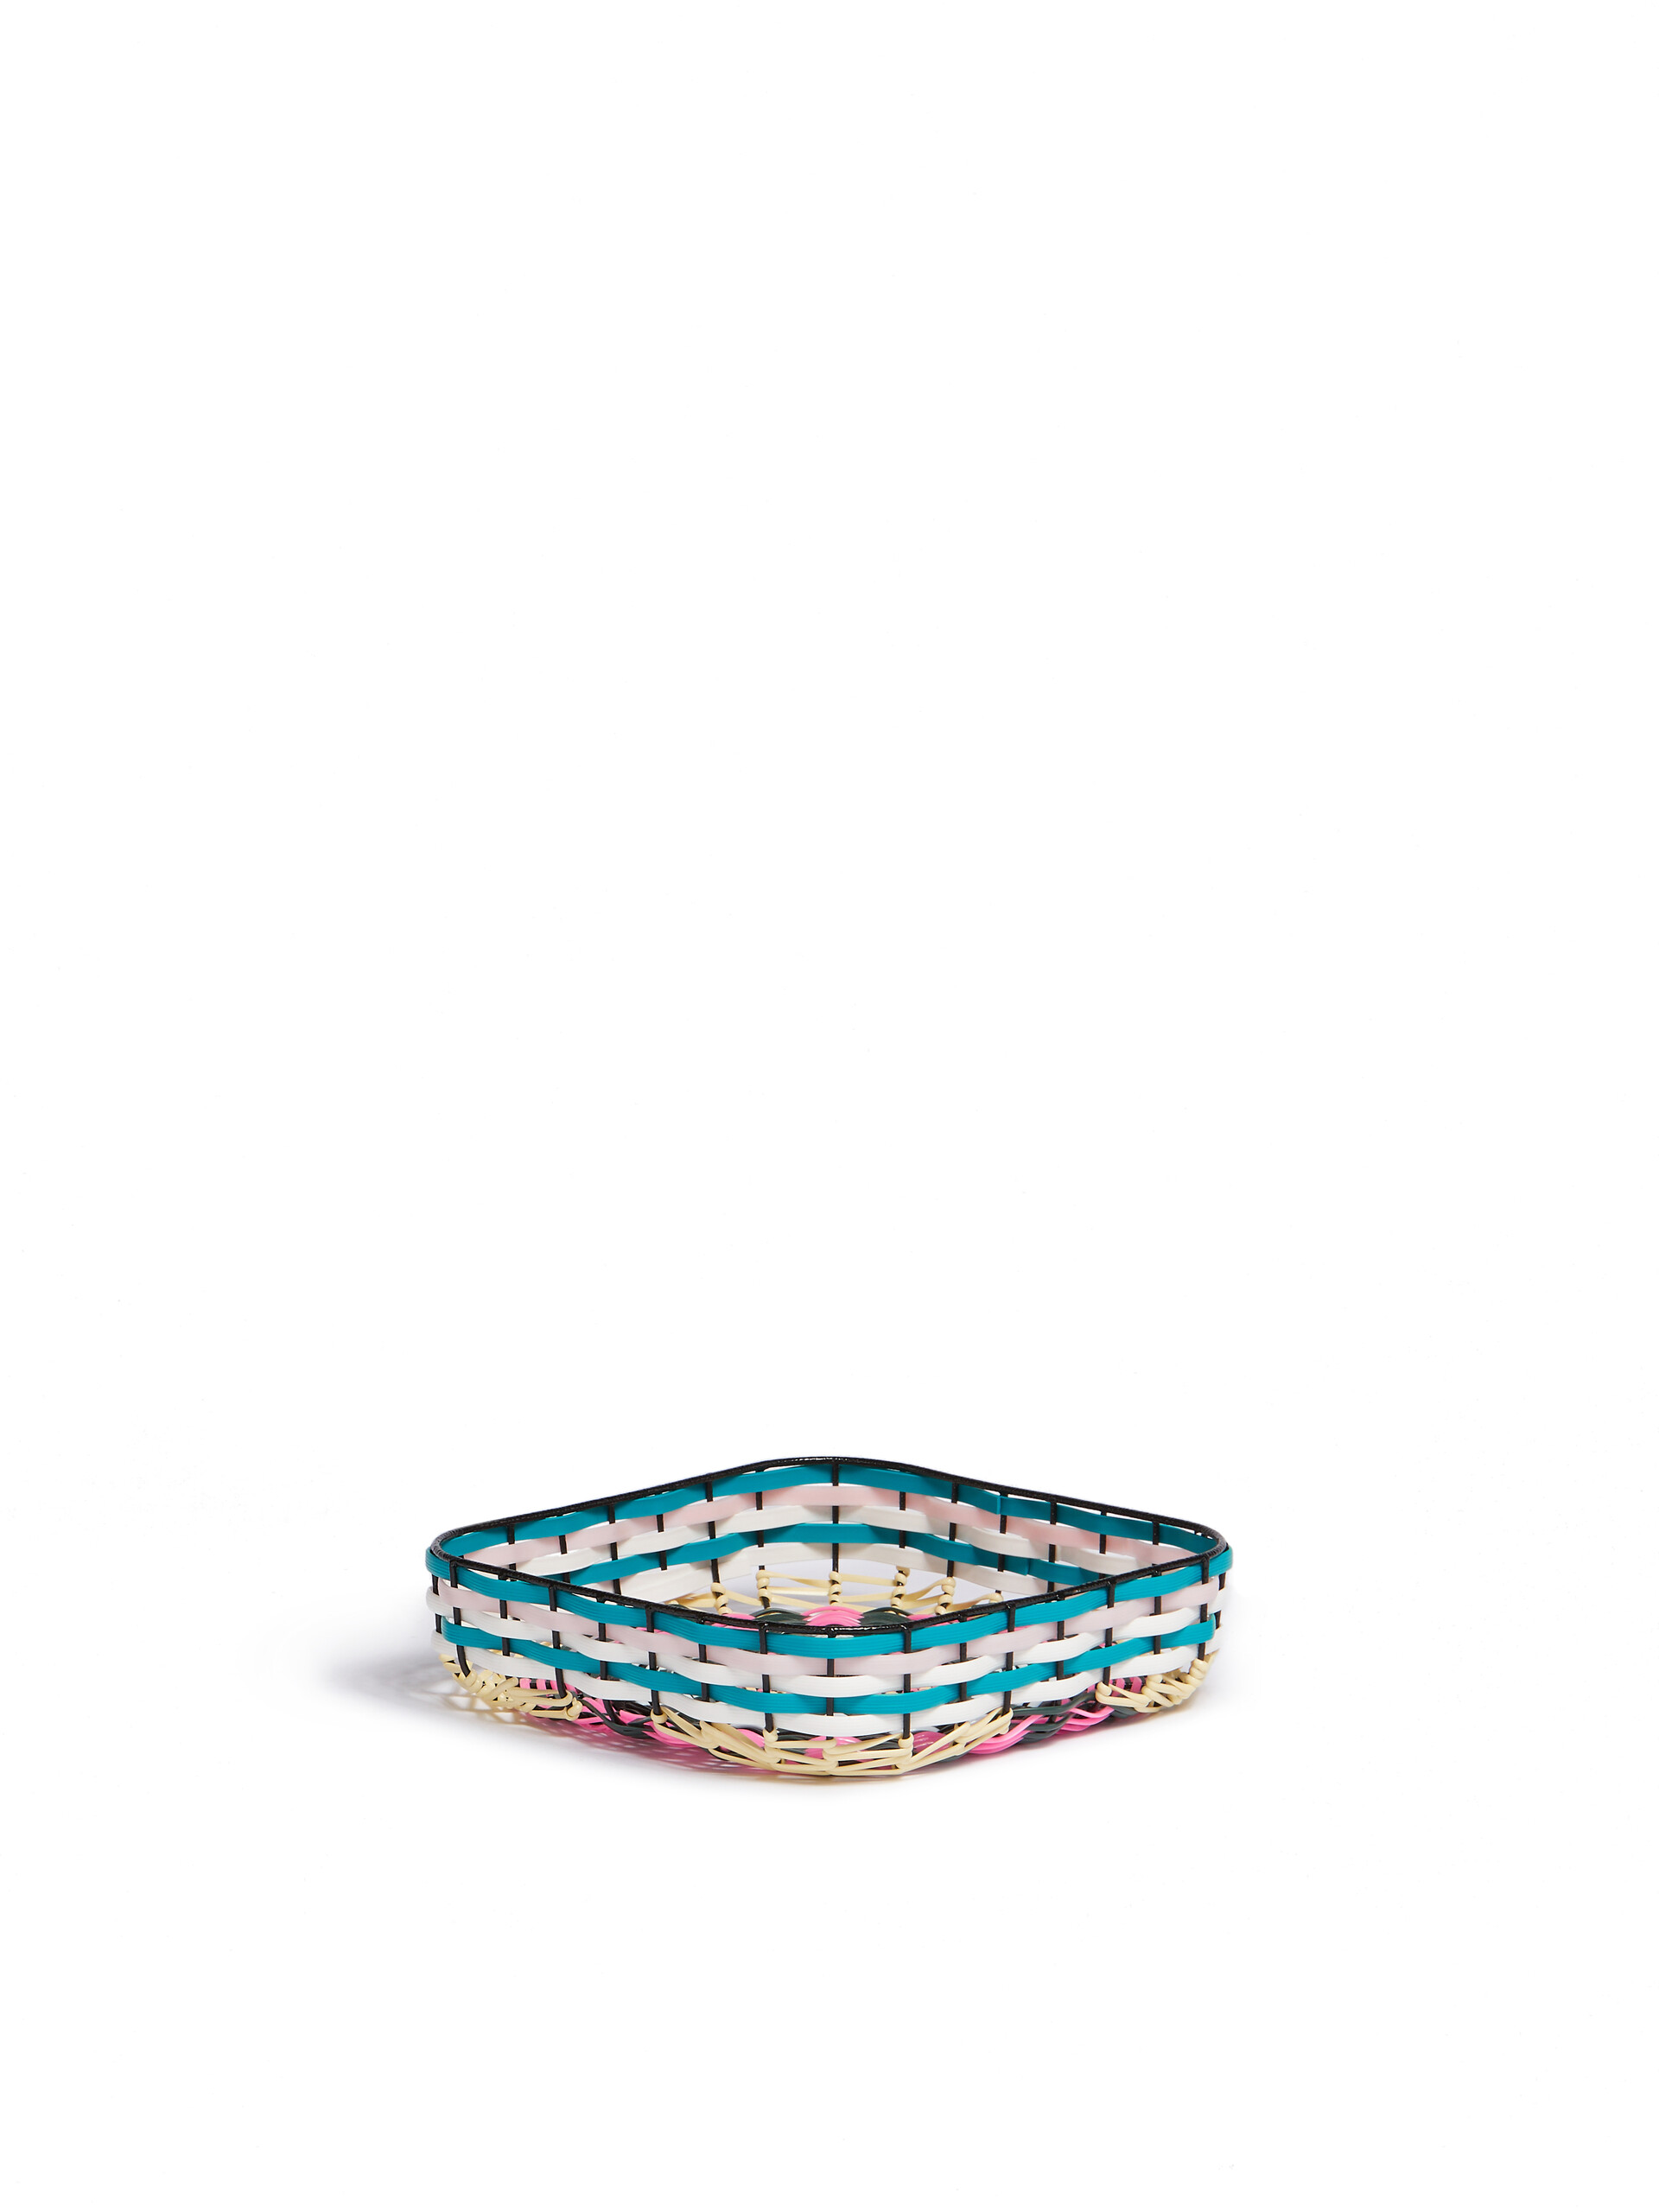 Pink MARNI MARKET woven cable square tray - Accessories - Image 2